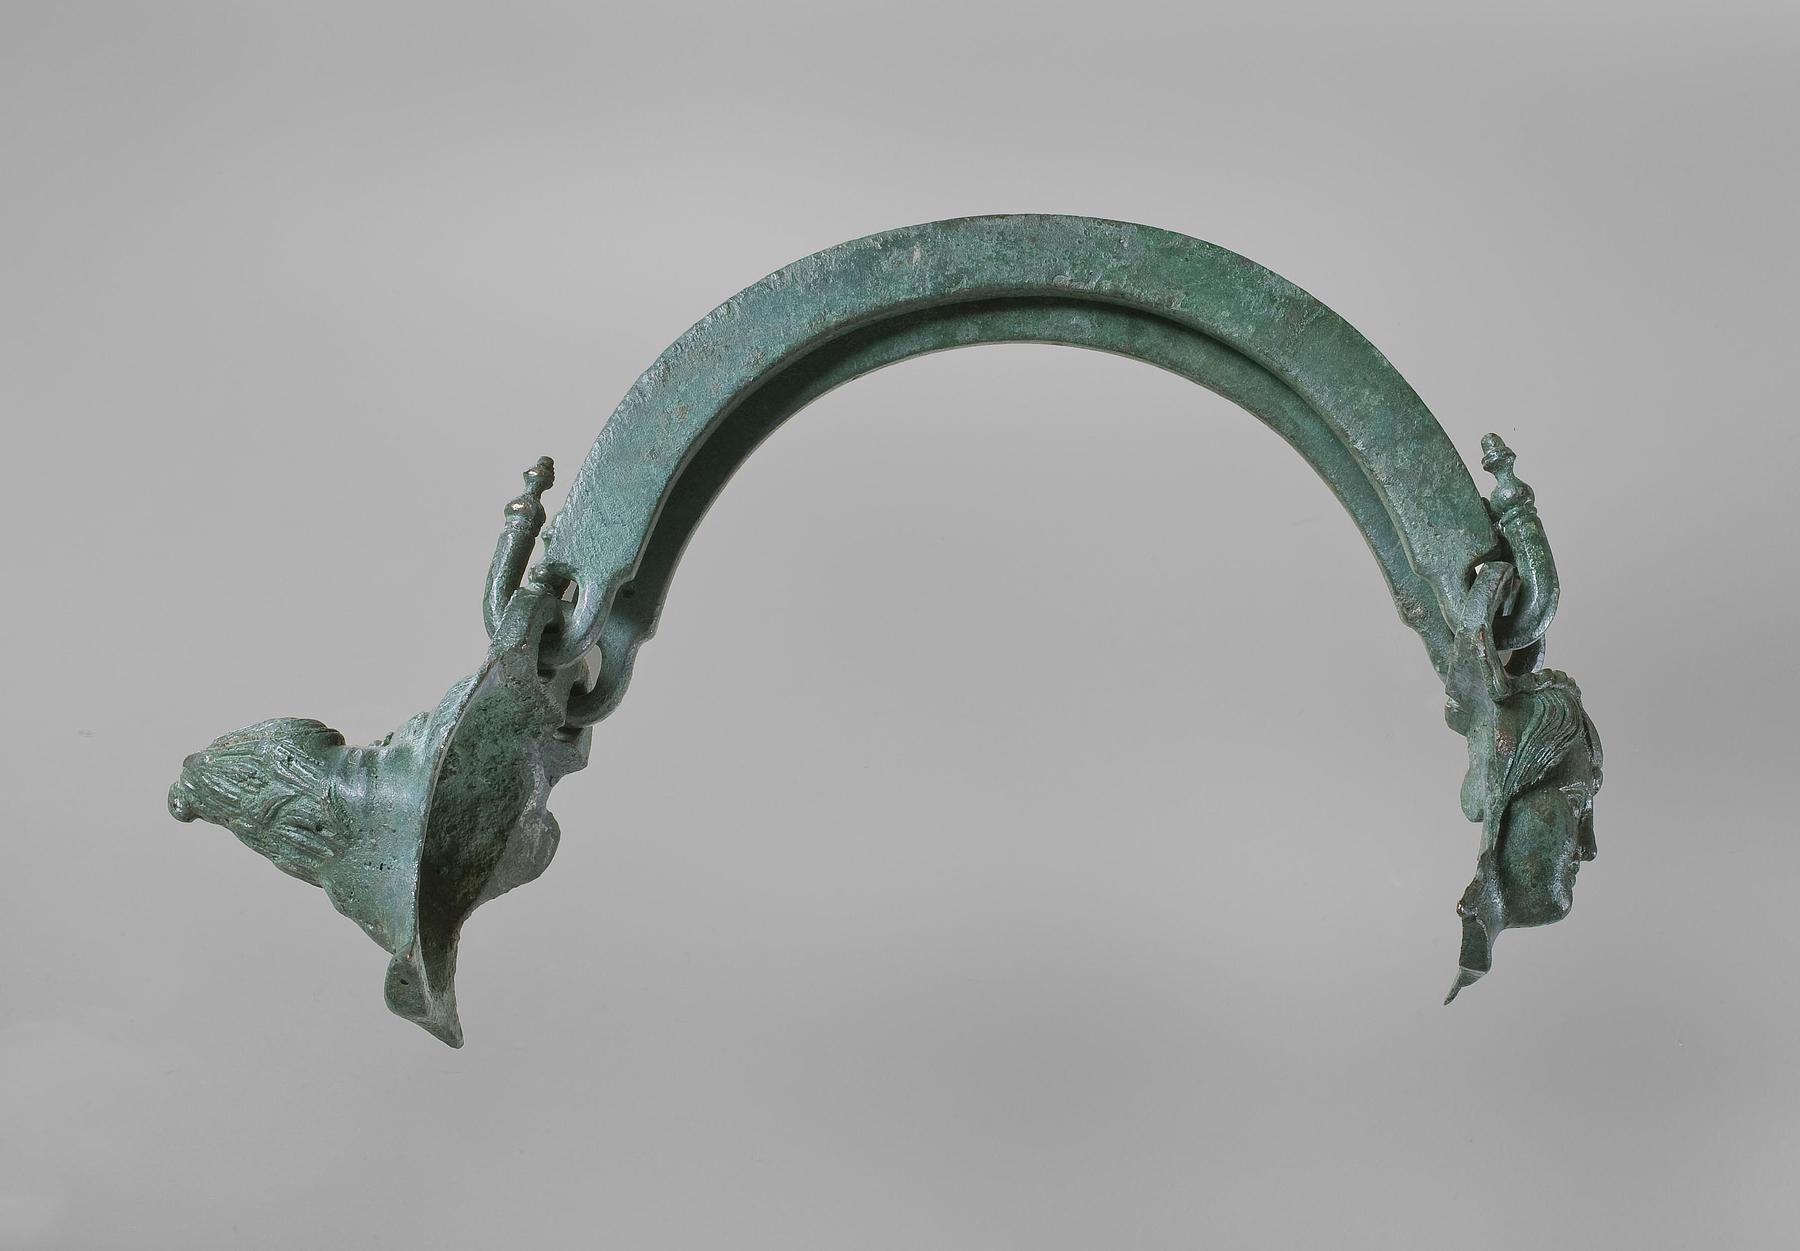 Set of handles with attachments in the shape of nymph and silenus masks, H2293